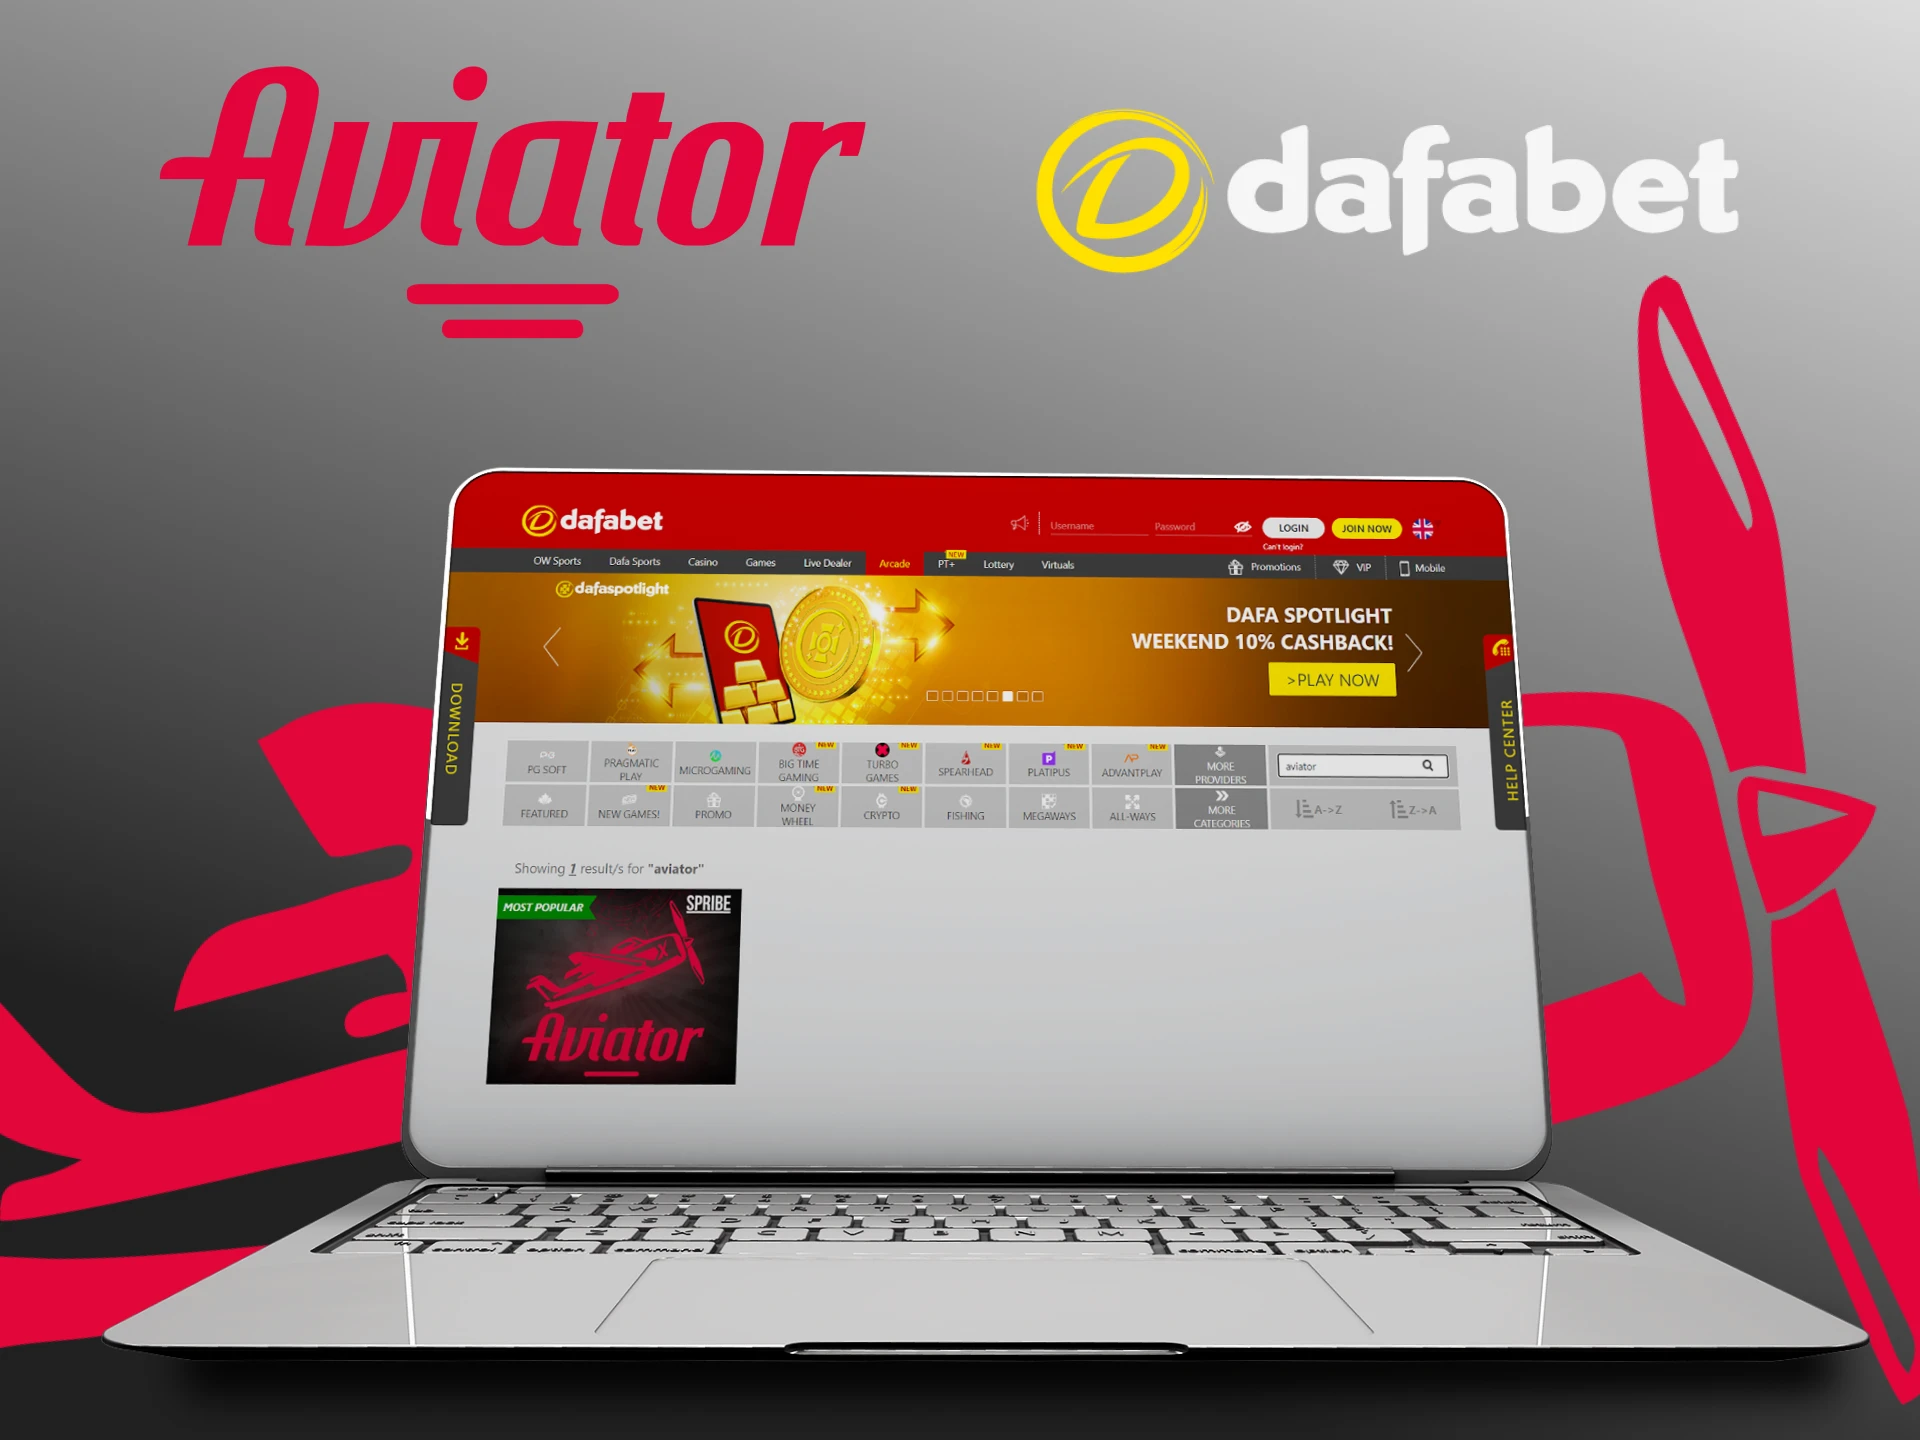 You can play the Aviator game on the Dafabet website.